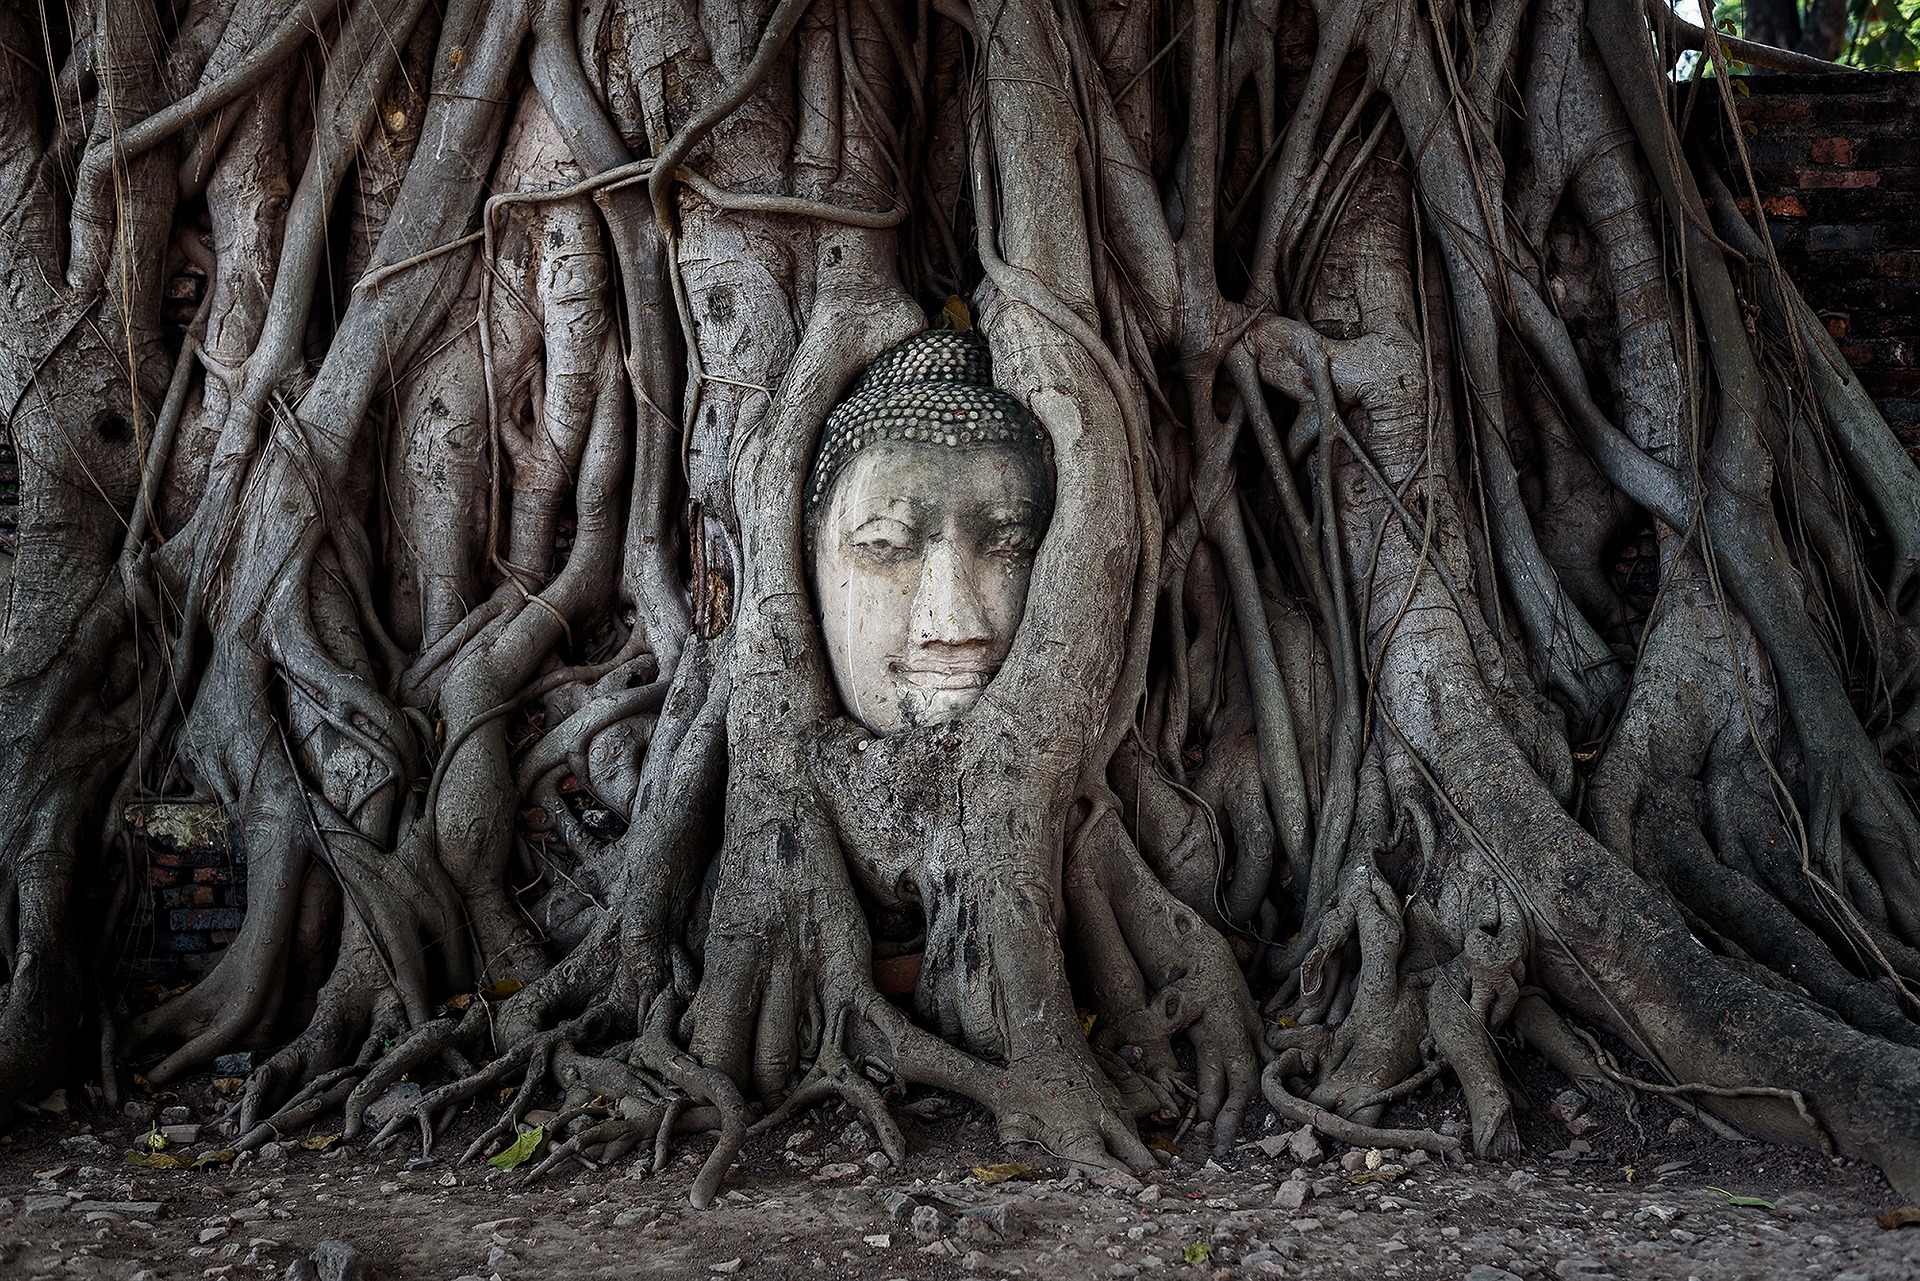 Buddhist statue inside tree roots, representing inner peace